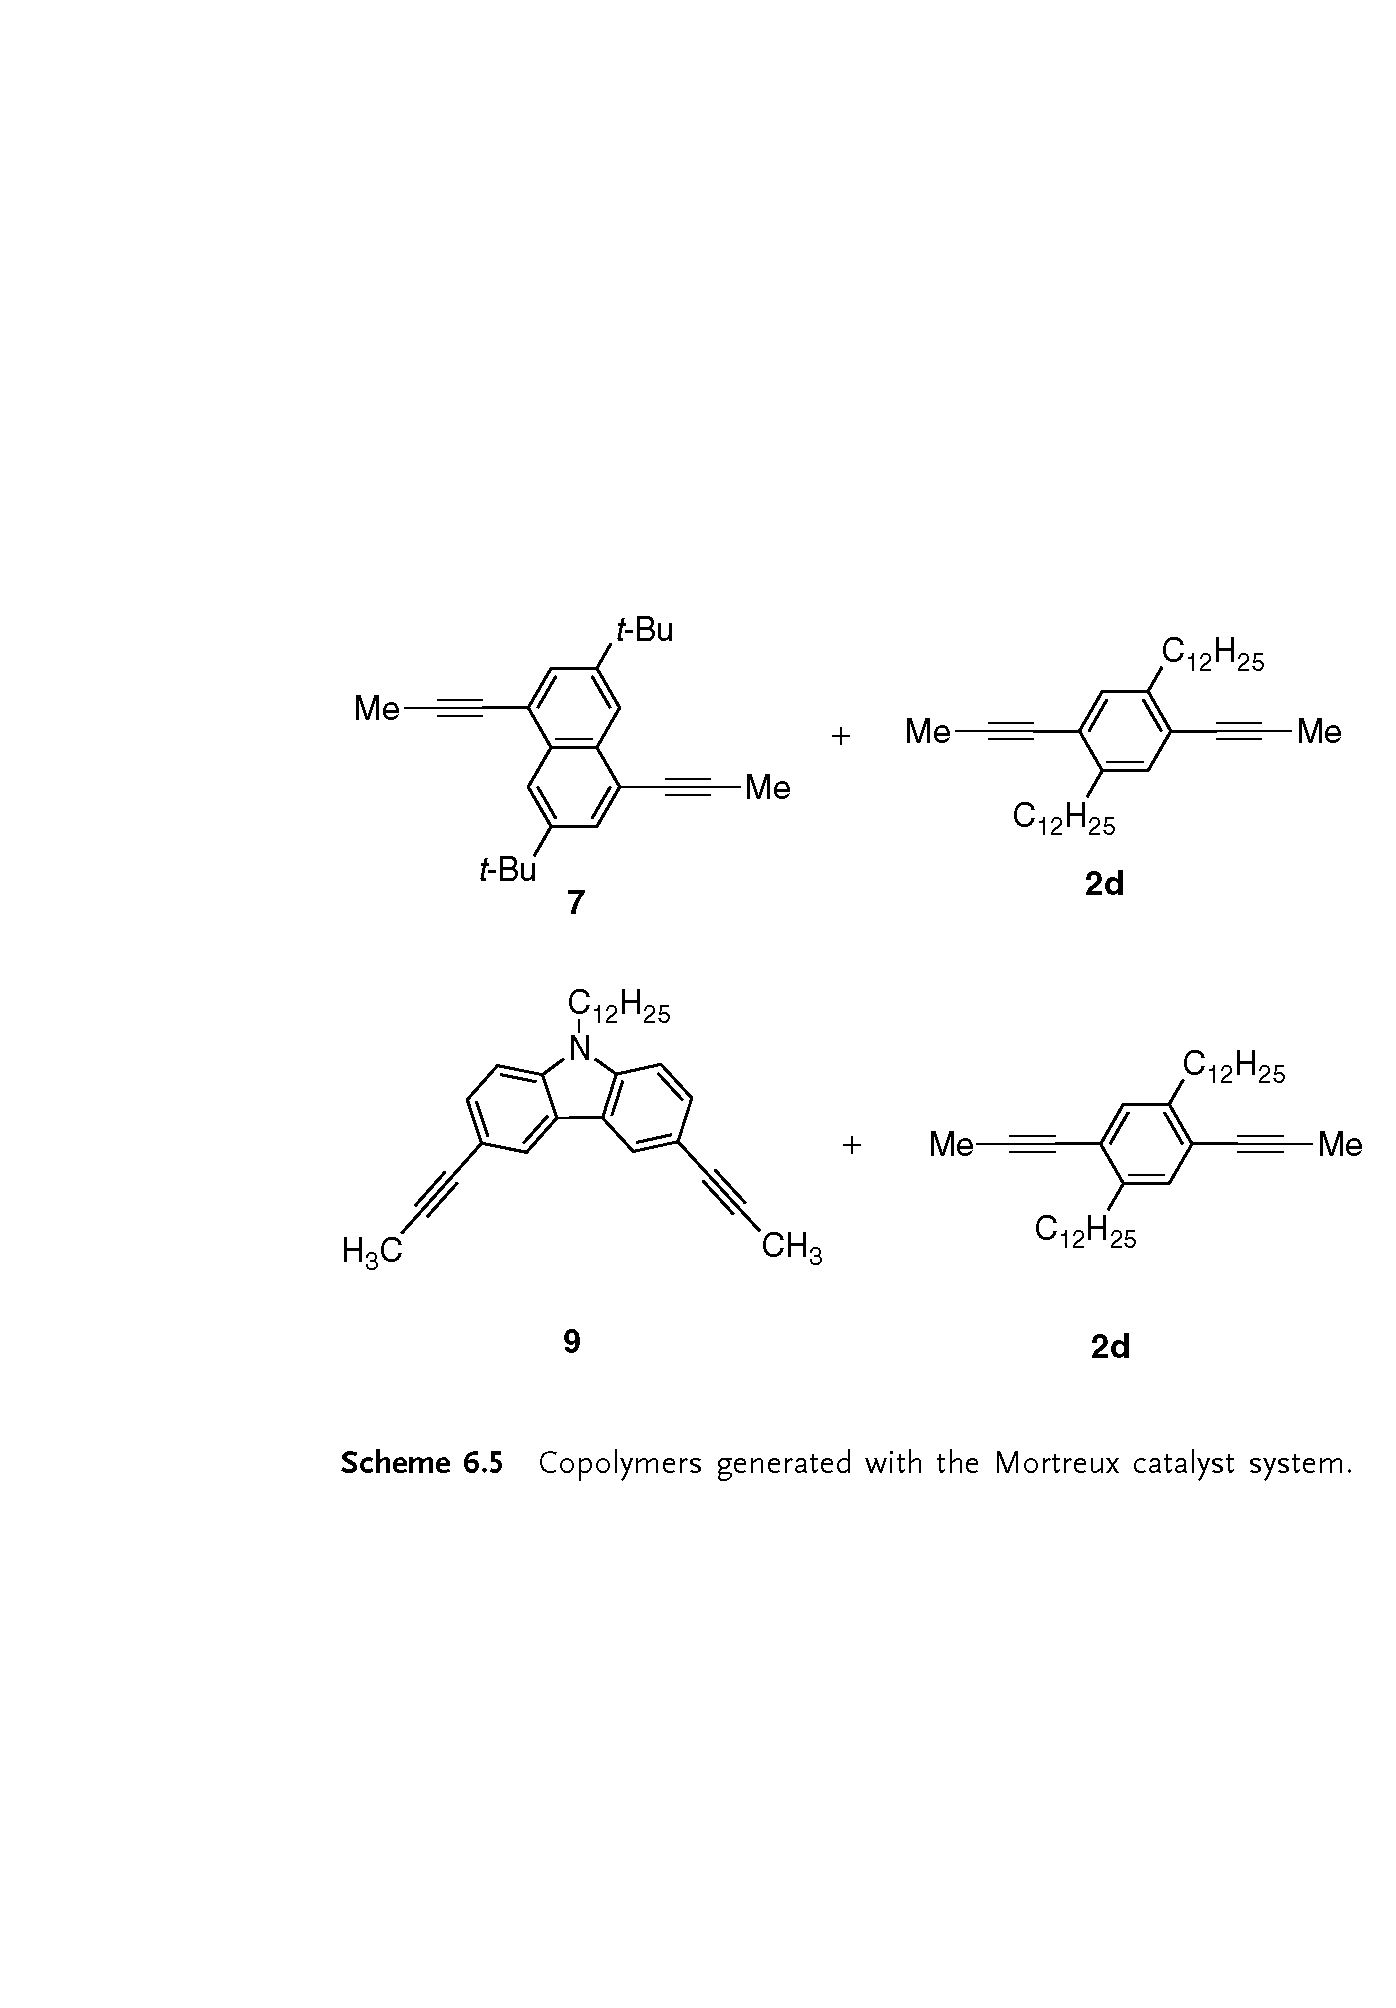 Scheme 6.5 Copolymers generated with the Mortreux catalyst system.